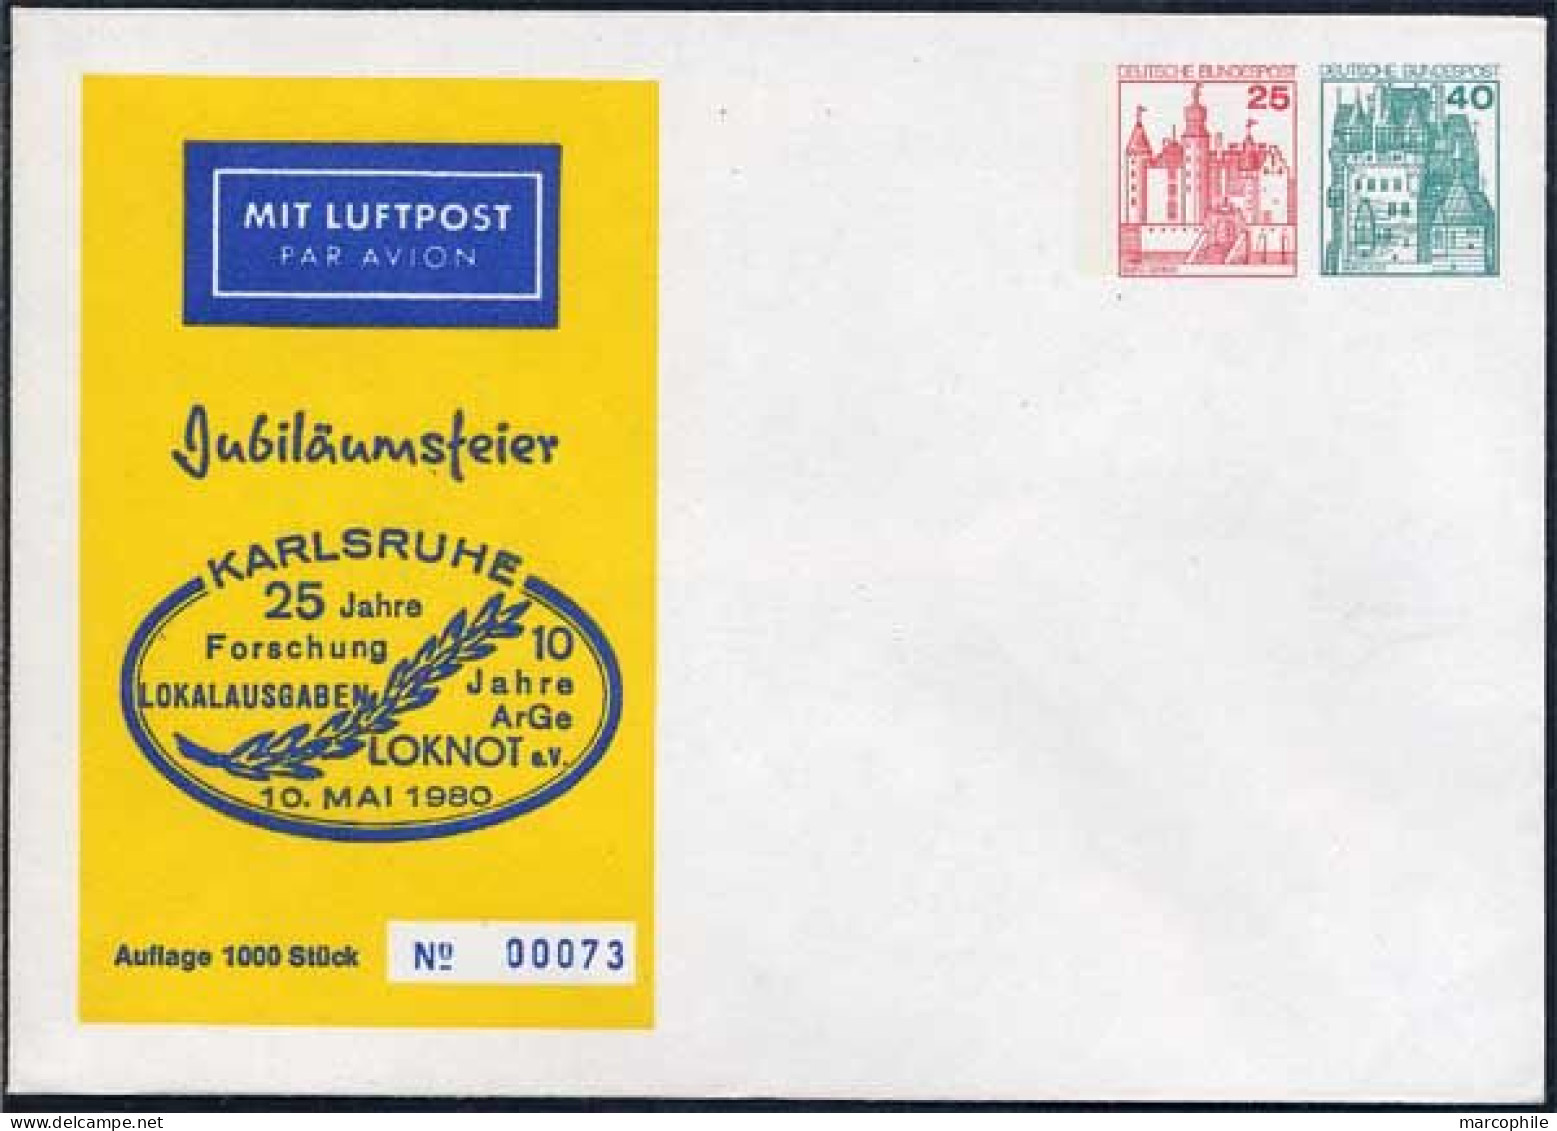 ALLEMAGNE - KARLSRUHE / ENTIER POSTAL PRIVE 2 FIGURINES IMPRIMEES NUMEROTE (ref 8352) - Private Covers - Mint